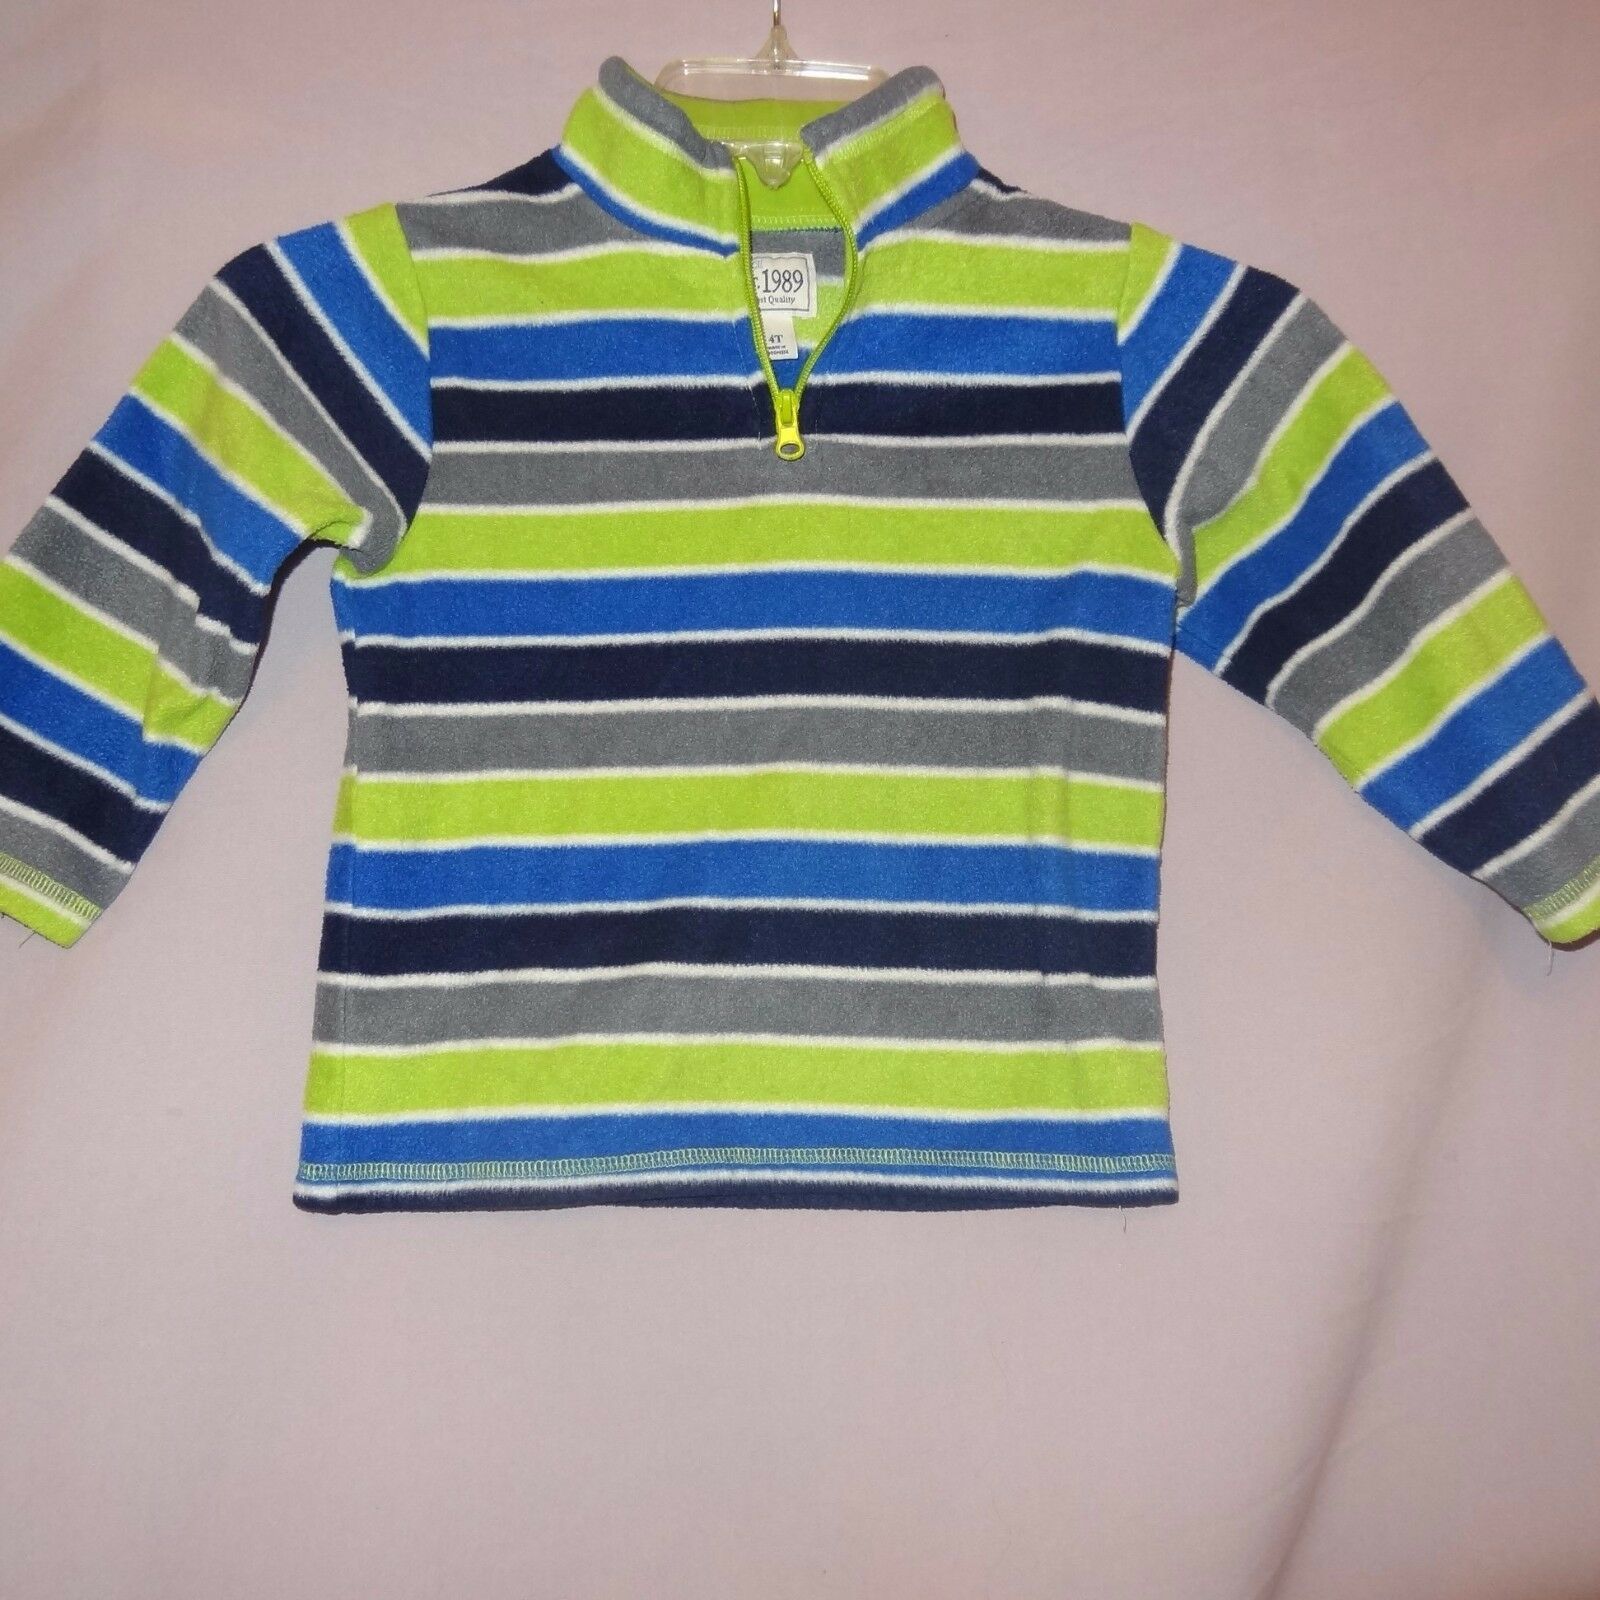 Primary image for Shirt Fleece Striped Size 4T Boys Green Blue Black Long Sleeve Place